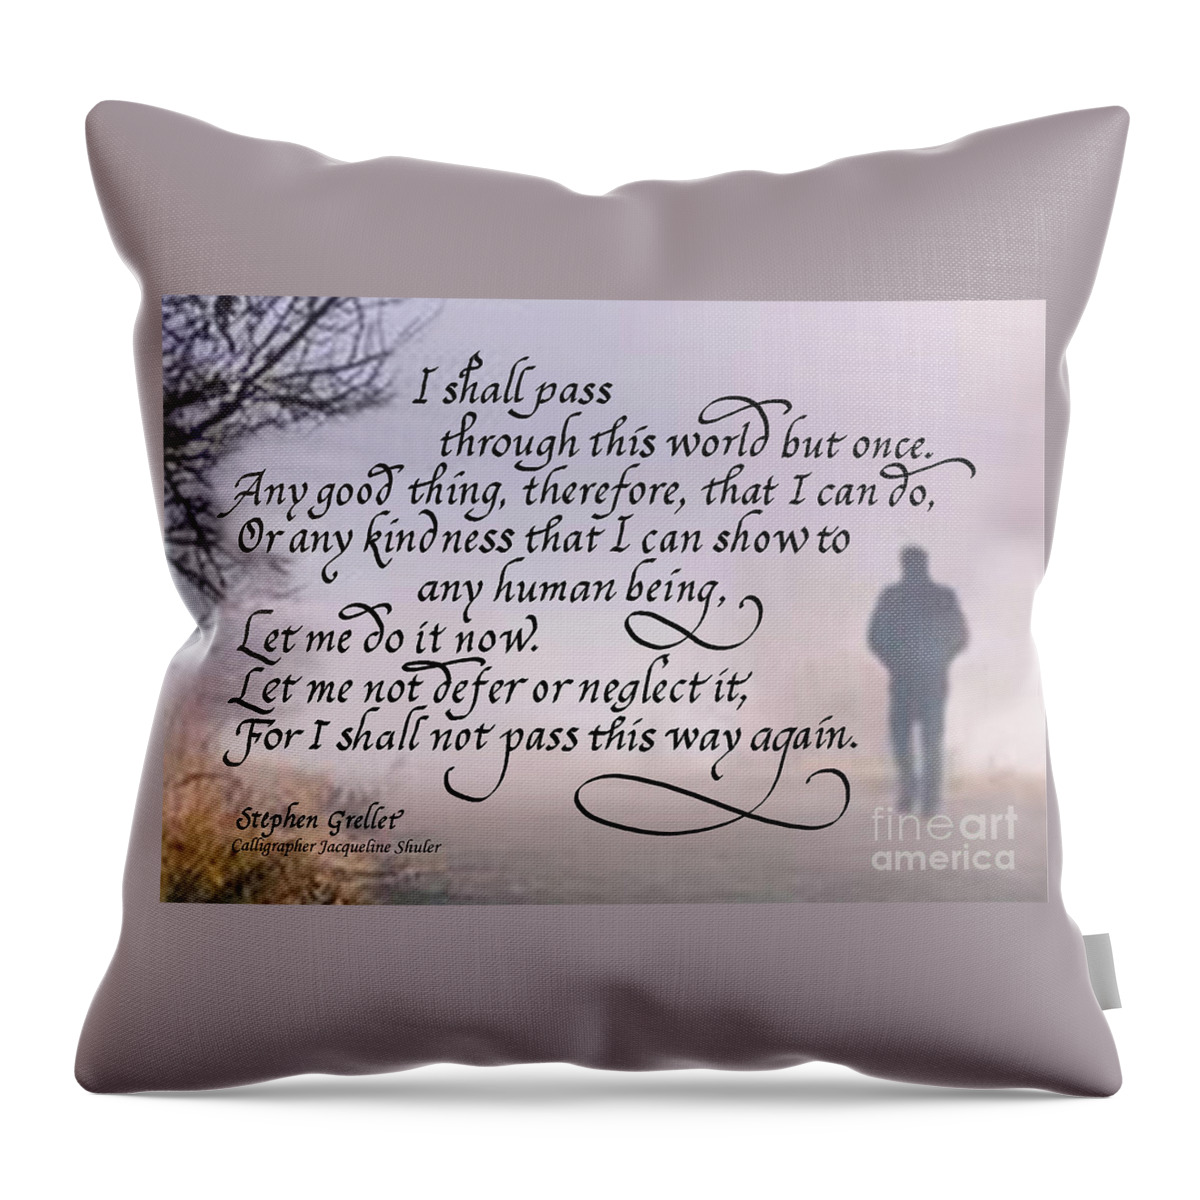 Kindness Throw Pillow featuring the digital art I Shall Pass This Way but Once by Jacqueline Shuler